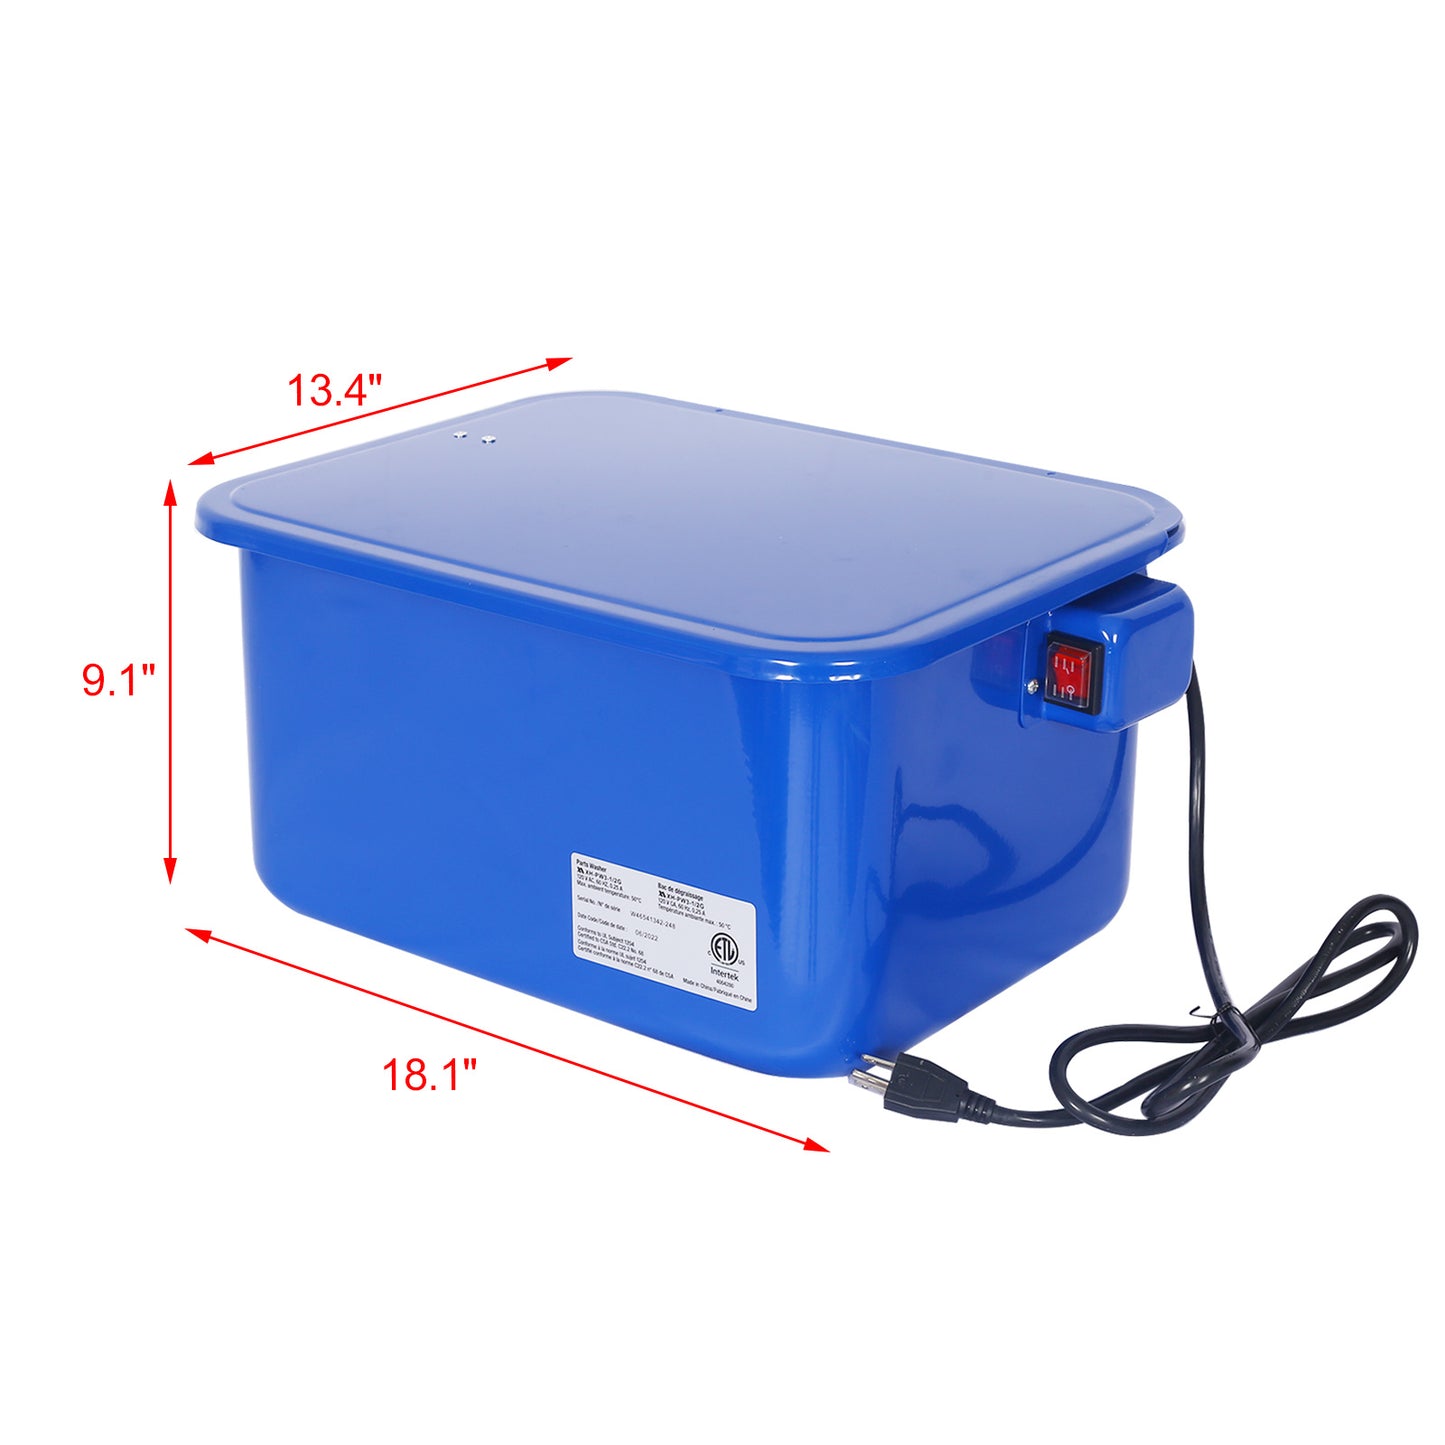 Cabinet parts washer with 110v pump